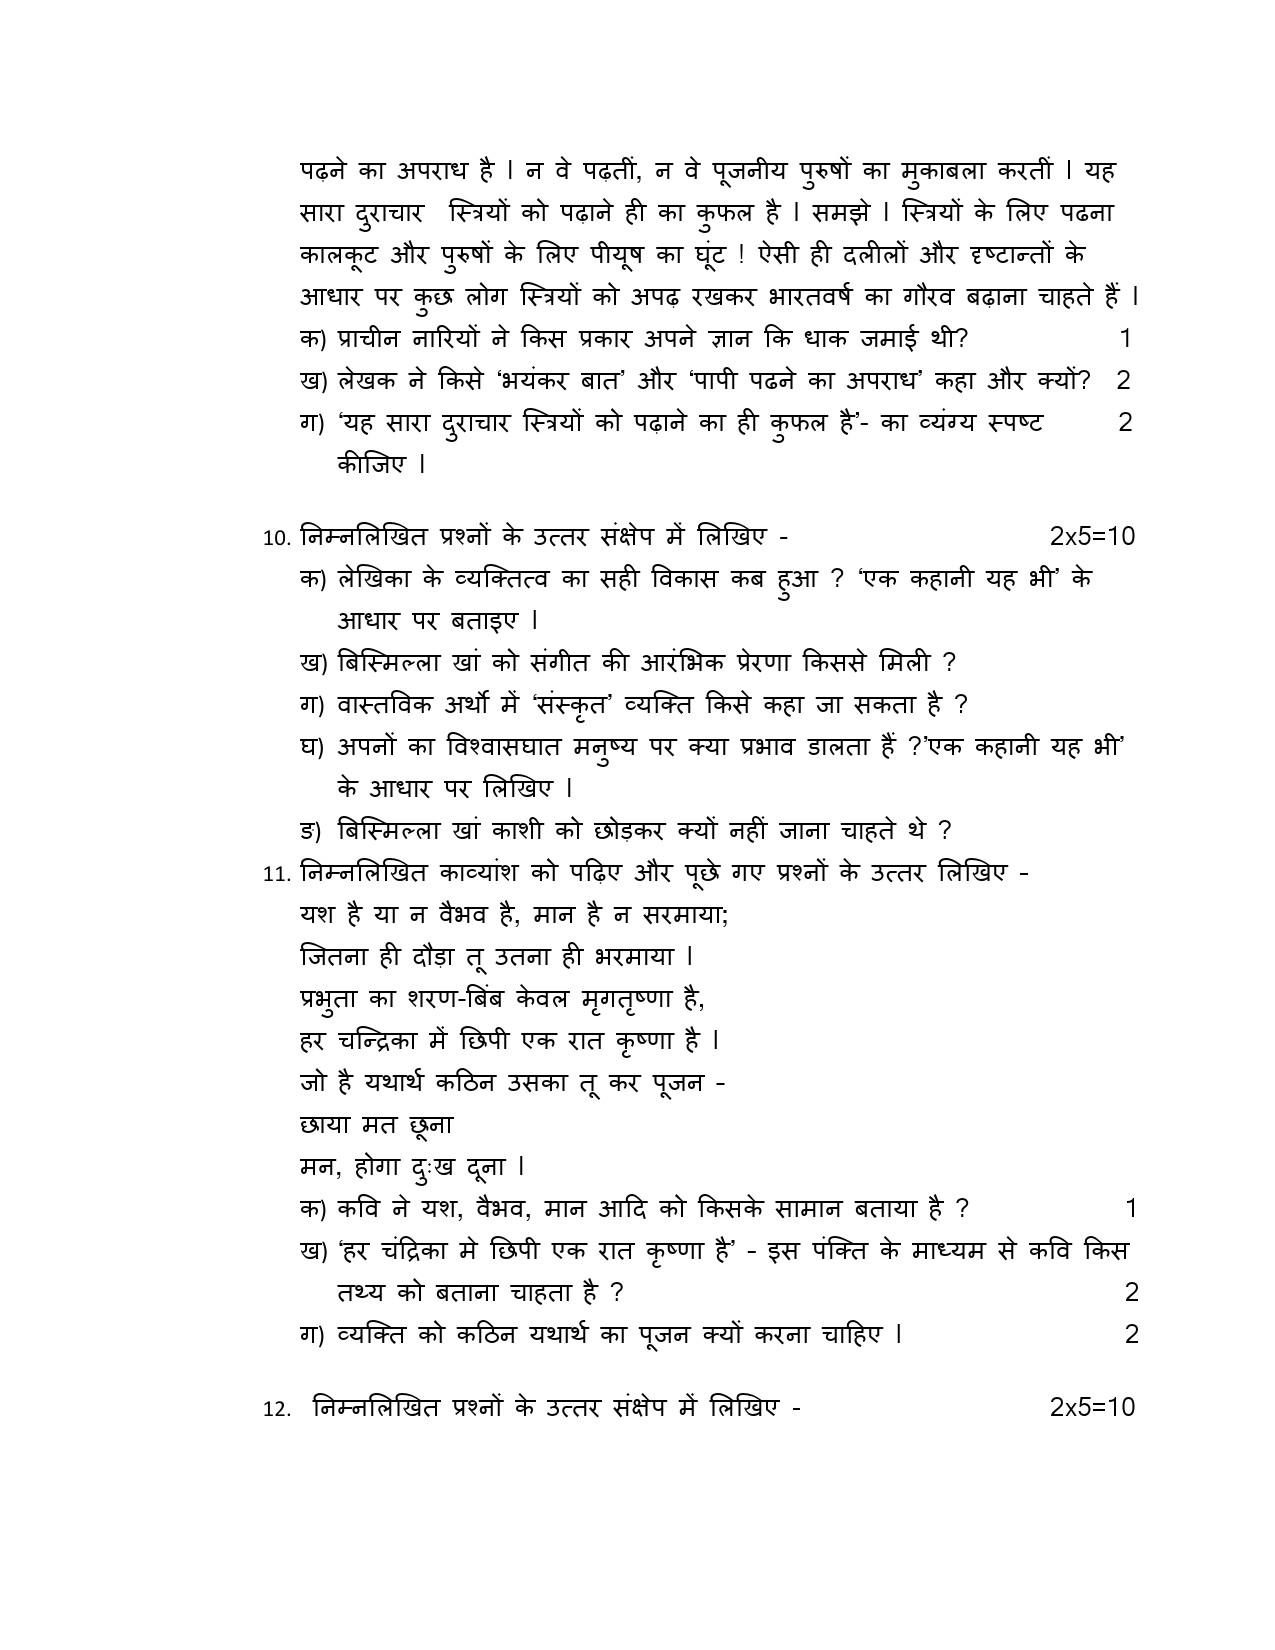 Hindi A CBSE Class X Sample Question Paper 2015 16 - Image 8